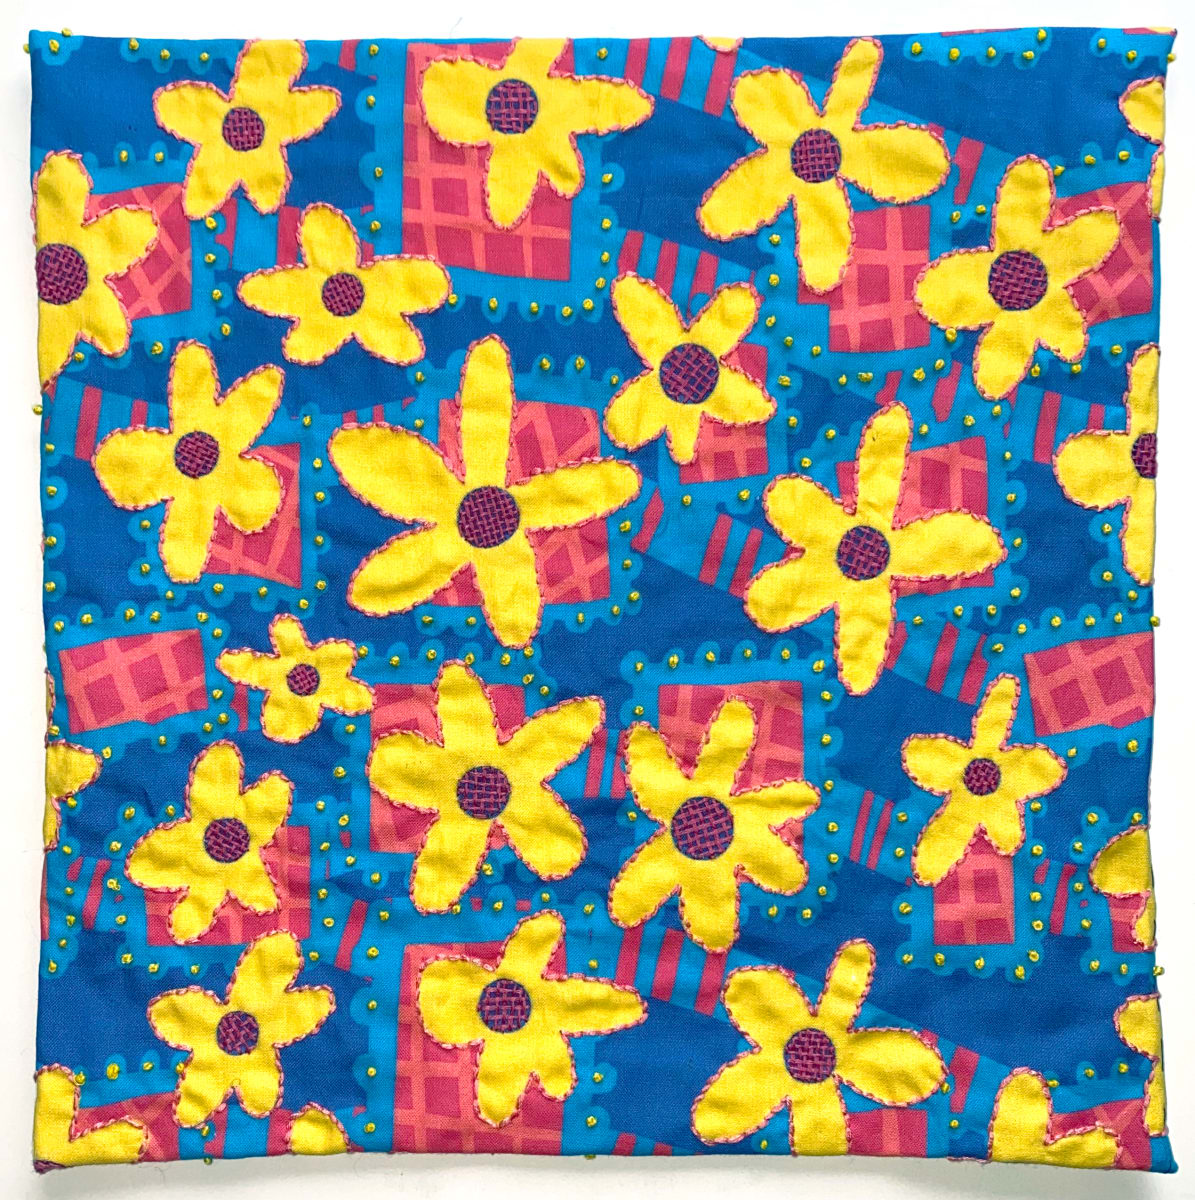 Flower Power - Yellow, Pink, Bue by Anne M Bray  Image: Embroidery on a print that I designed.